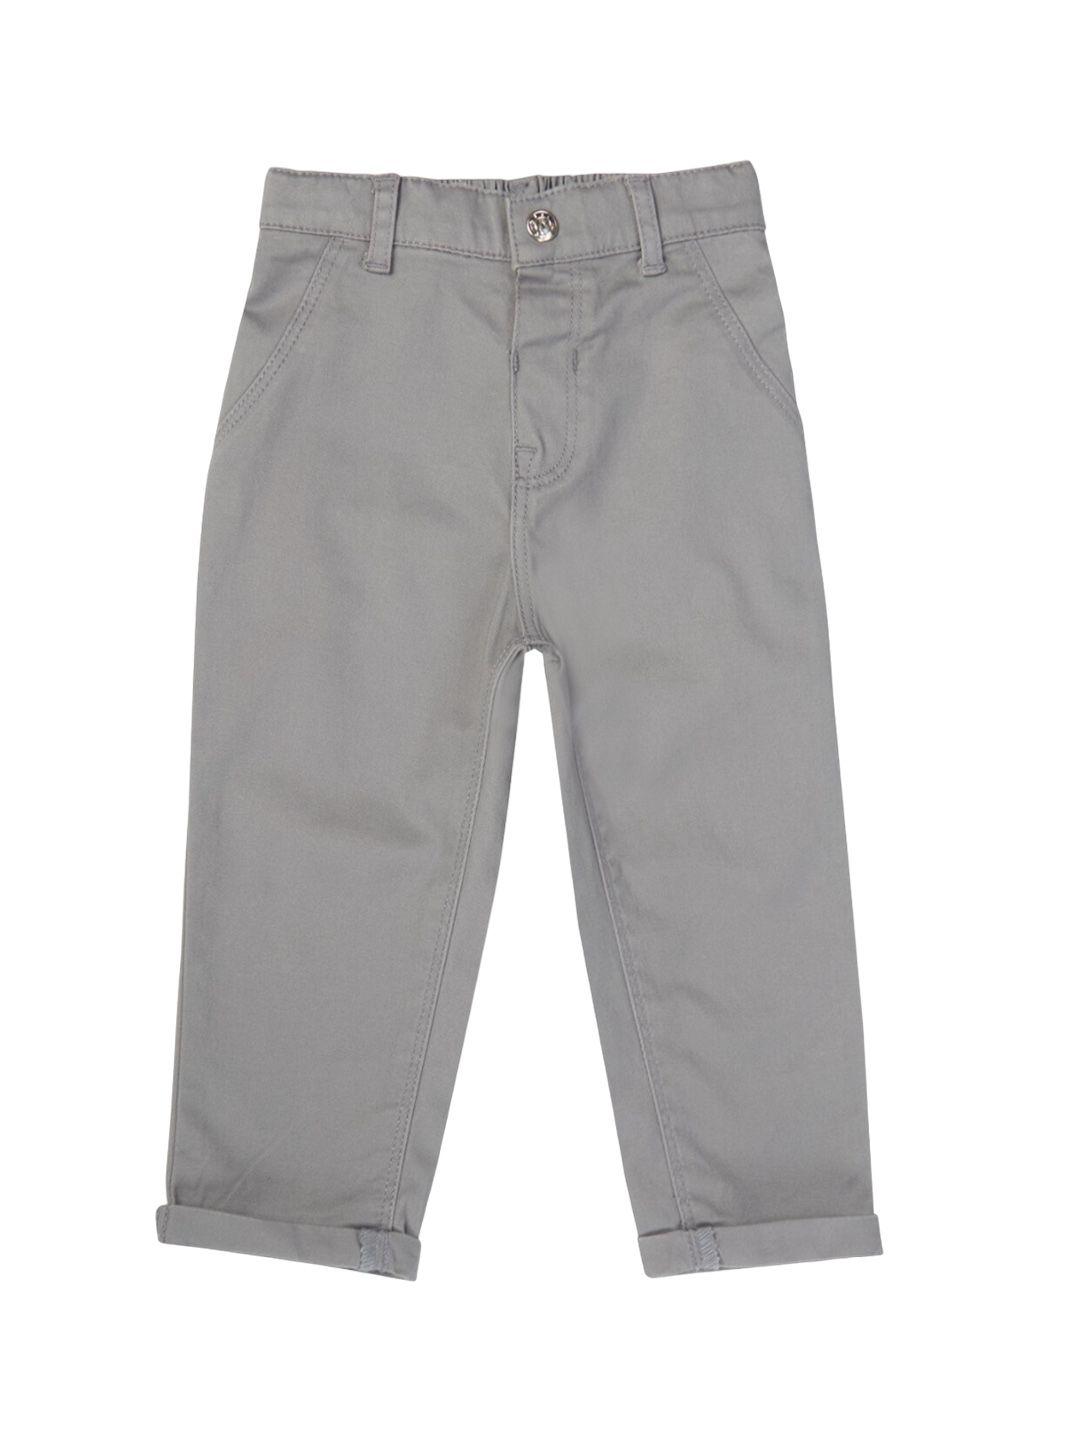 gj baby boys mid-rise cotton chinos trousers